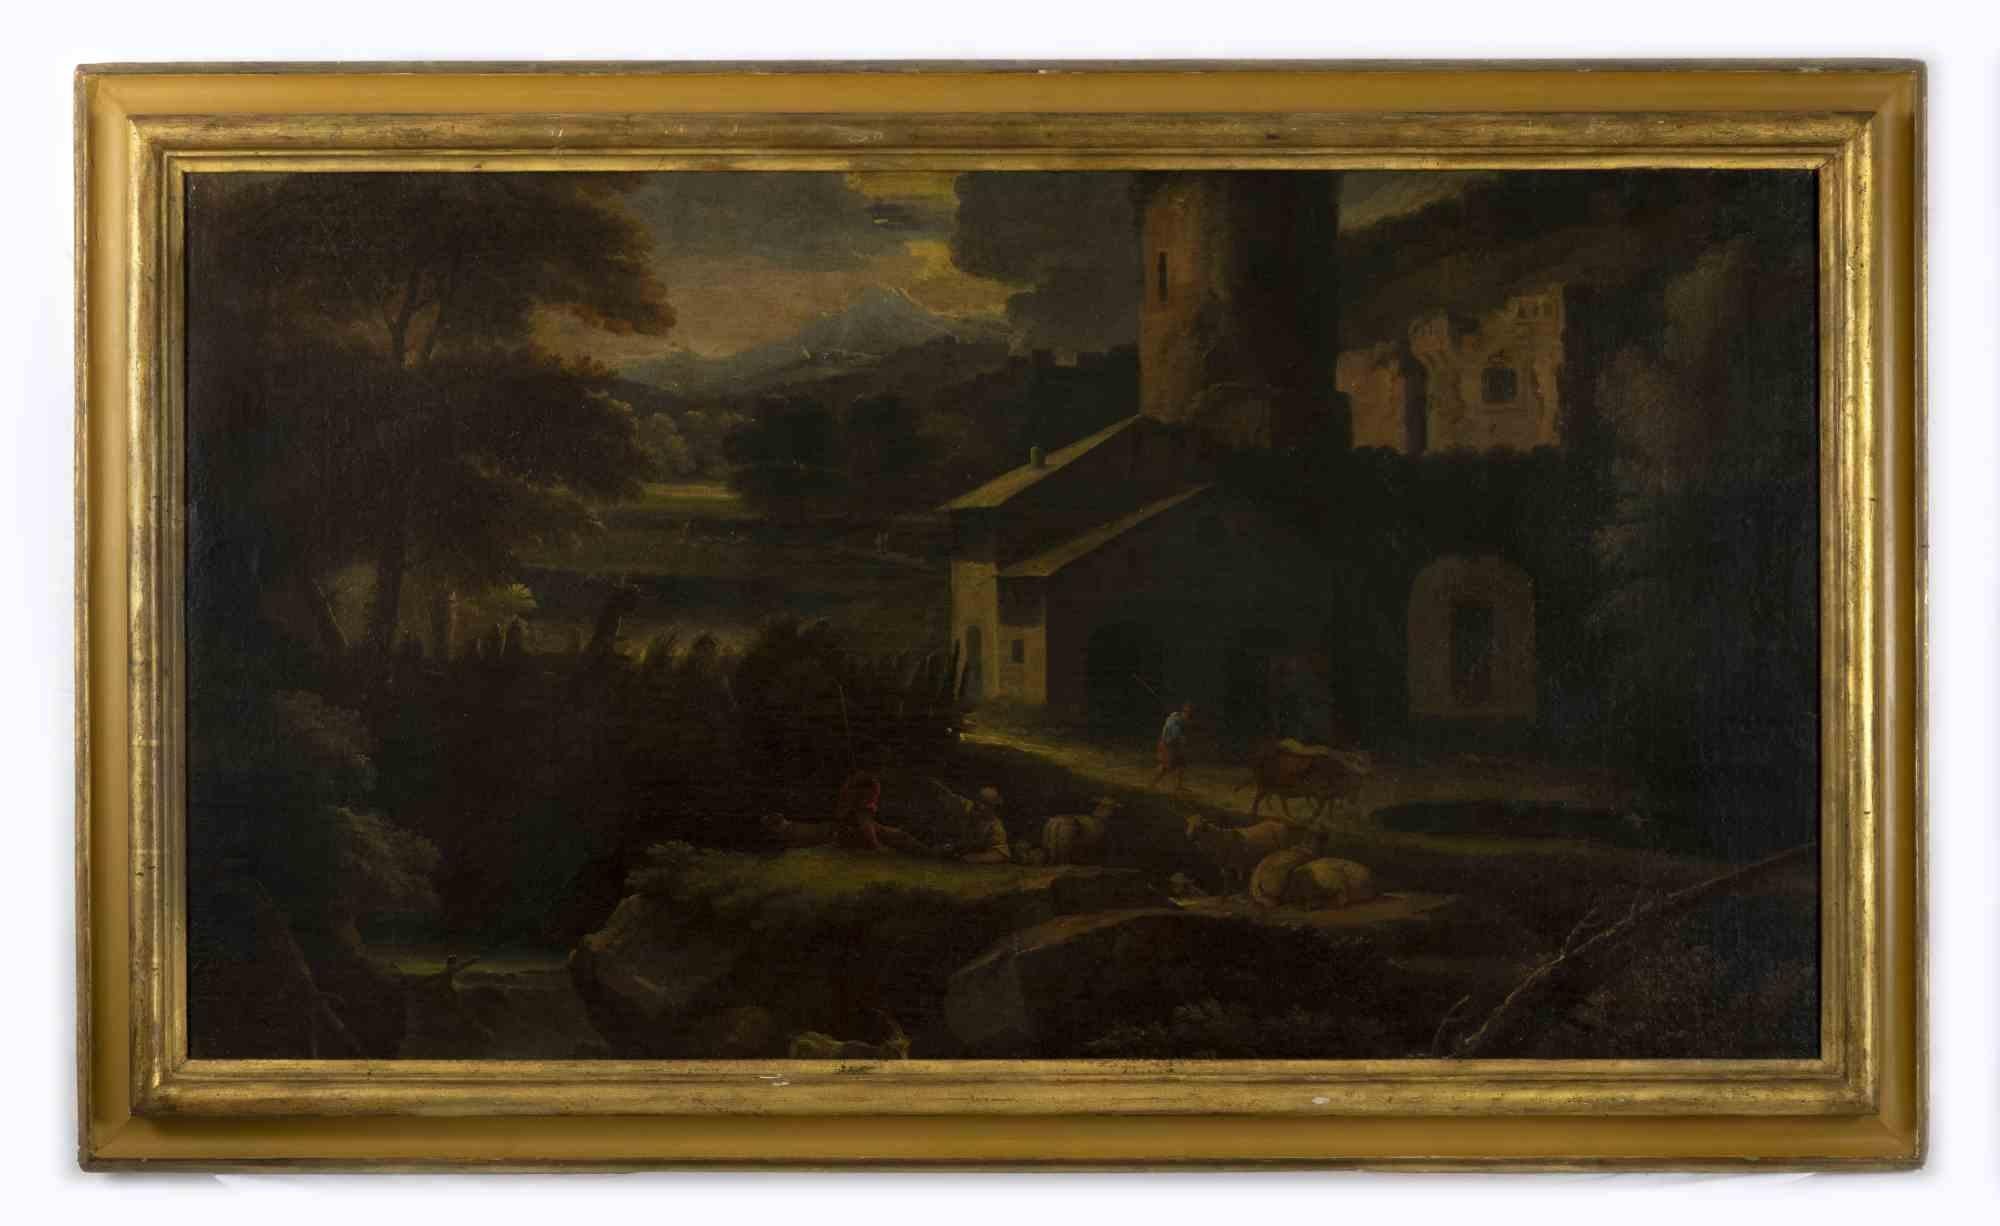 Unknown Figurative Painting - Landscape - Oil Painting - 17th Century